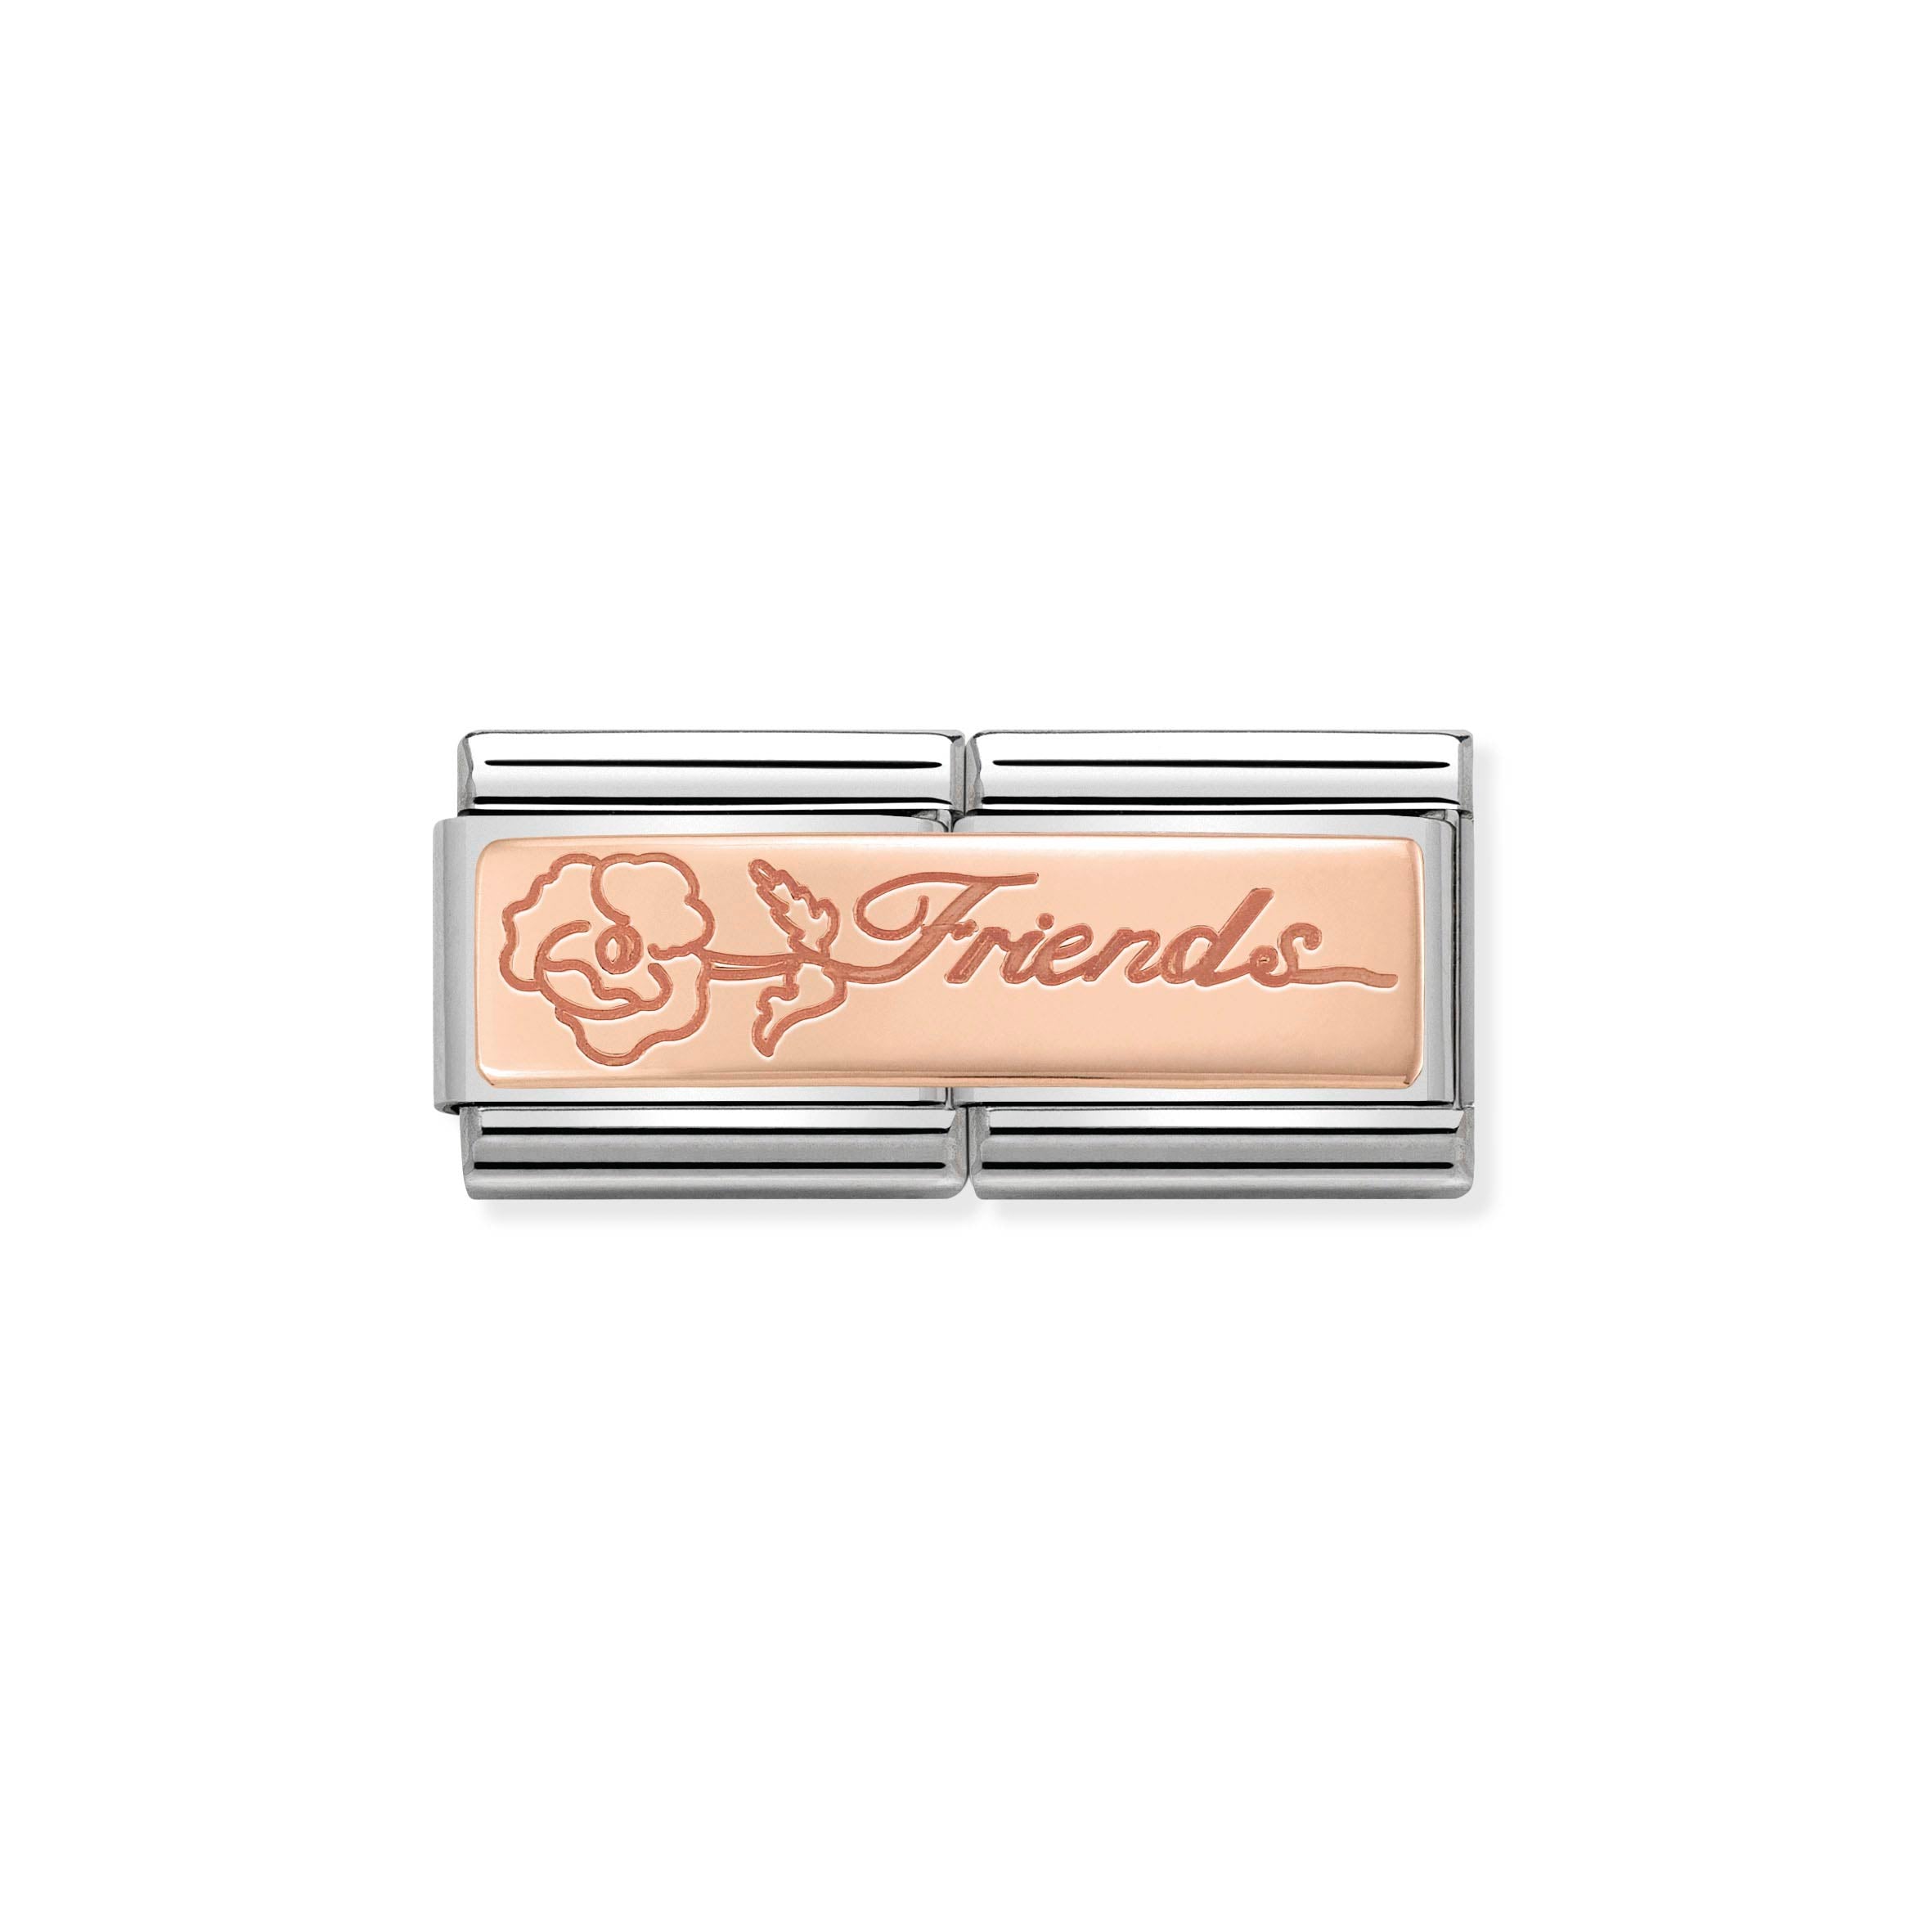 NOMINATION - Composable Classic DOUBLE ENGRAVED st/steel, 9ct rose gold (Friends with flower)